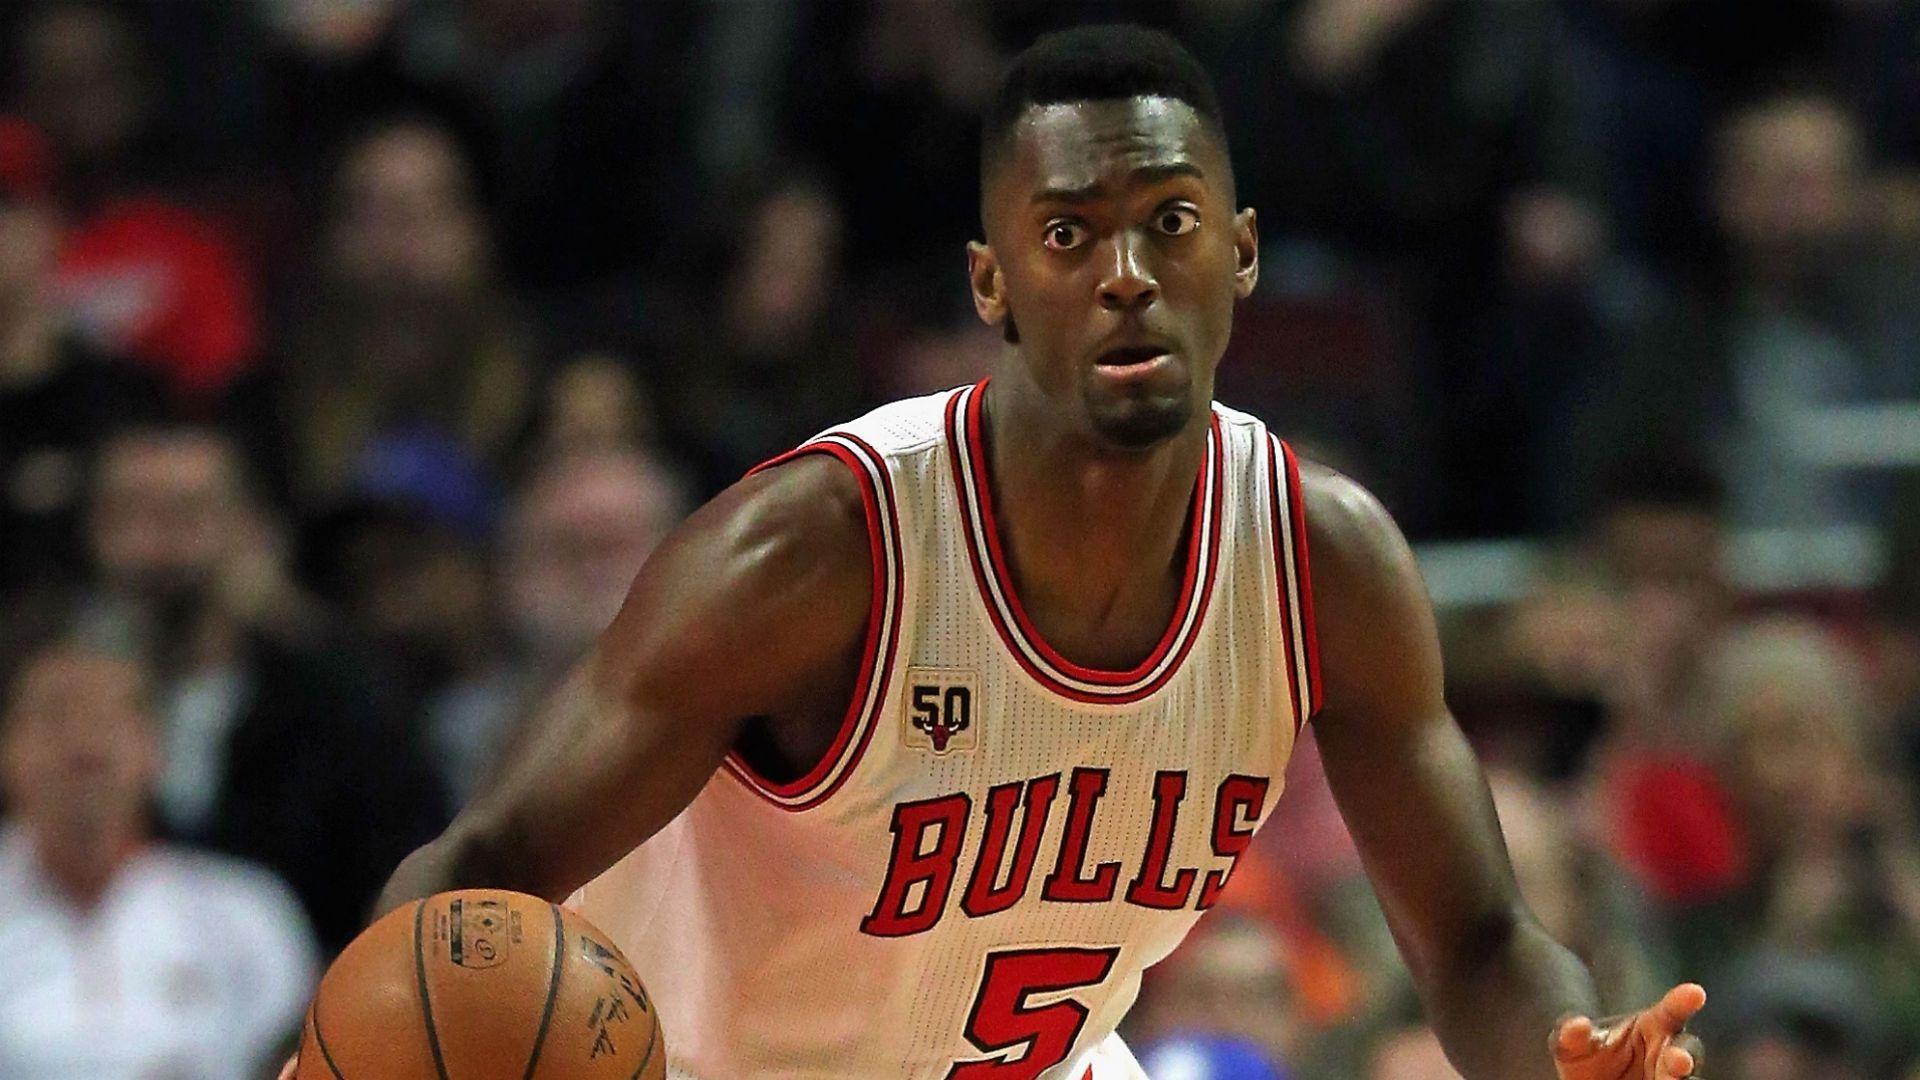 Bulls news: Adam Silver deferred to Chicago to handle Bobby Portis